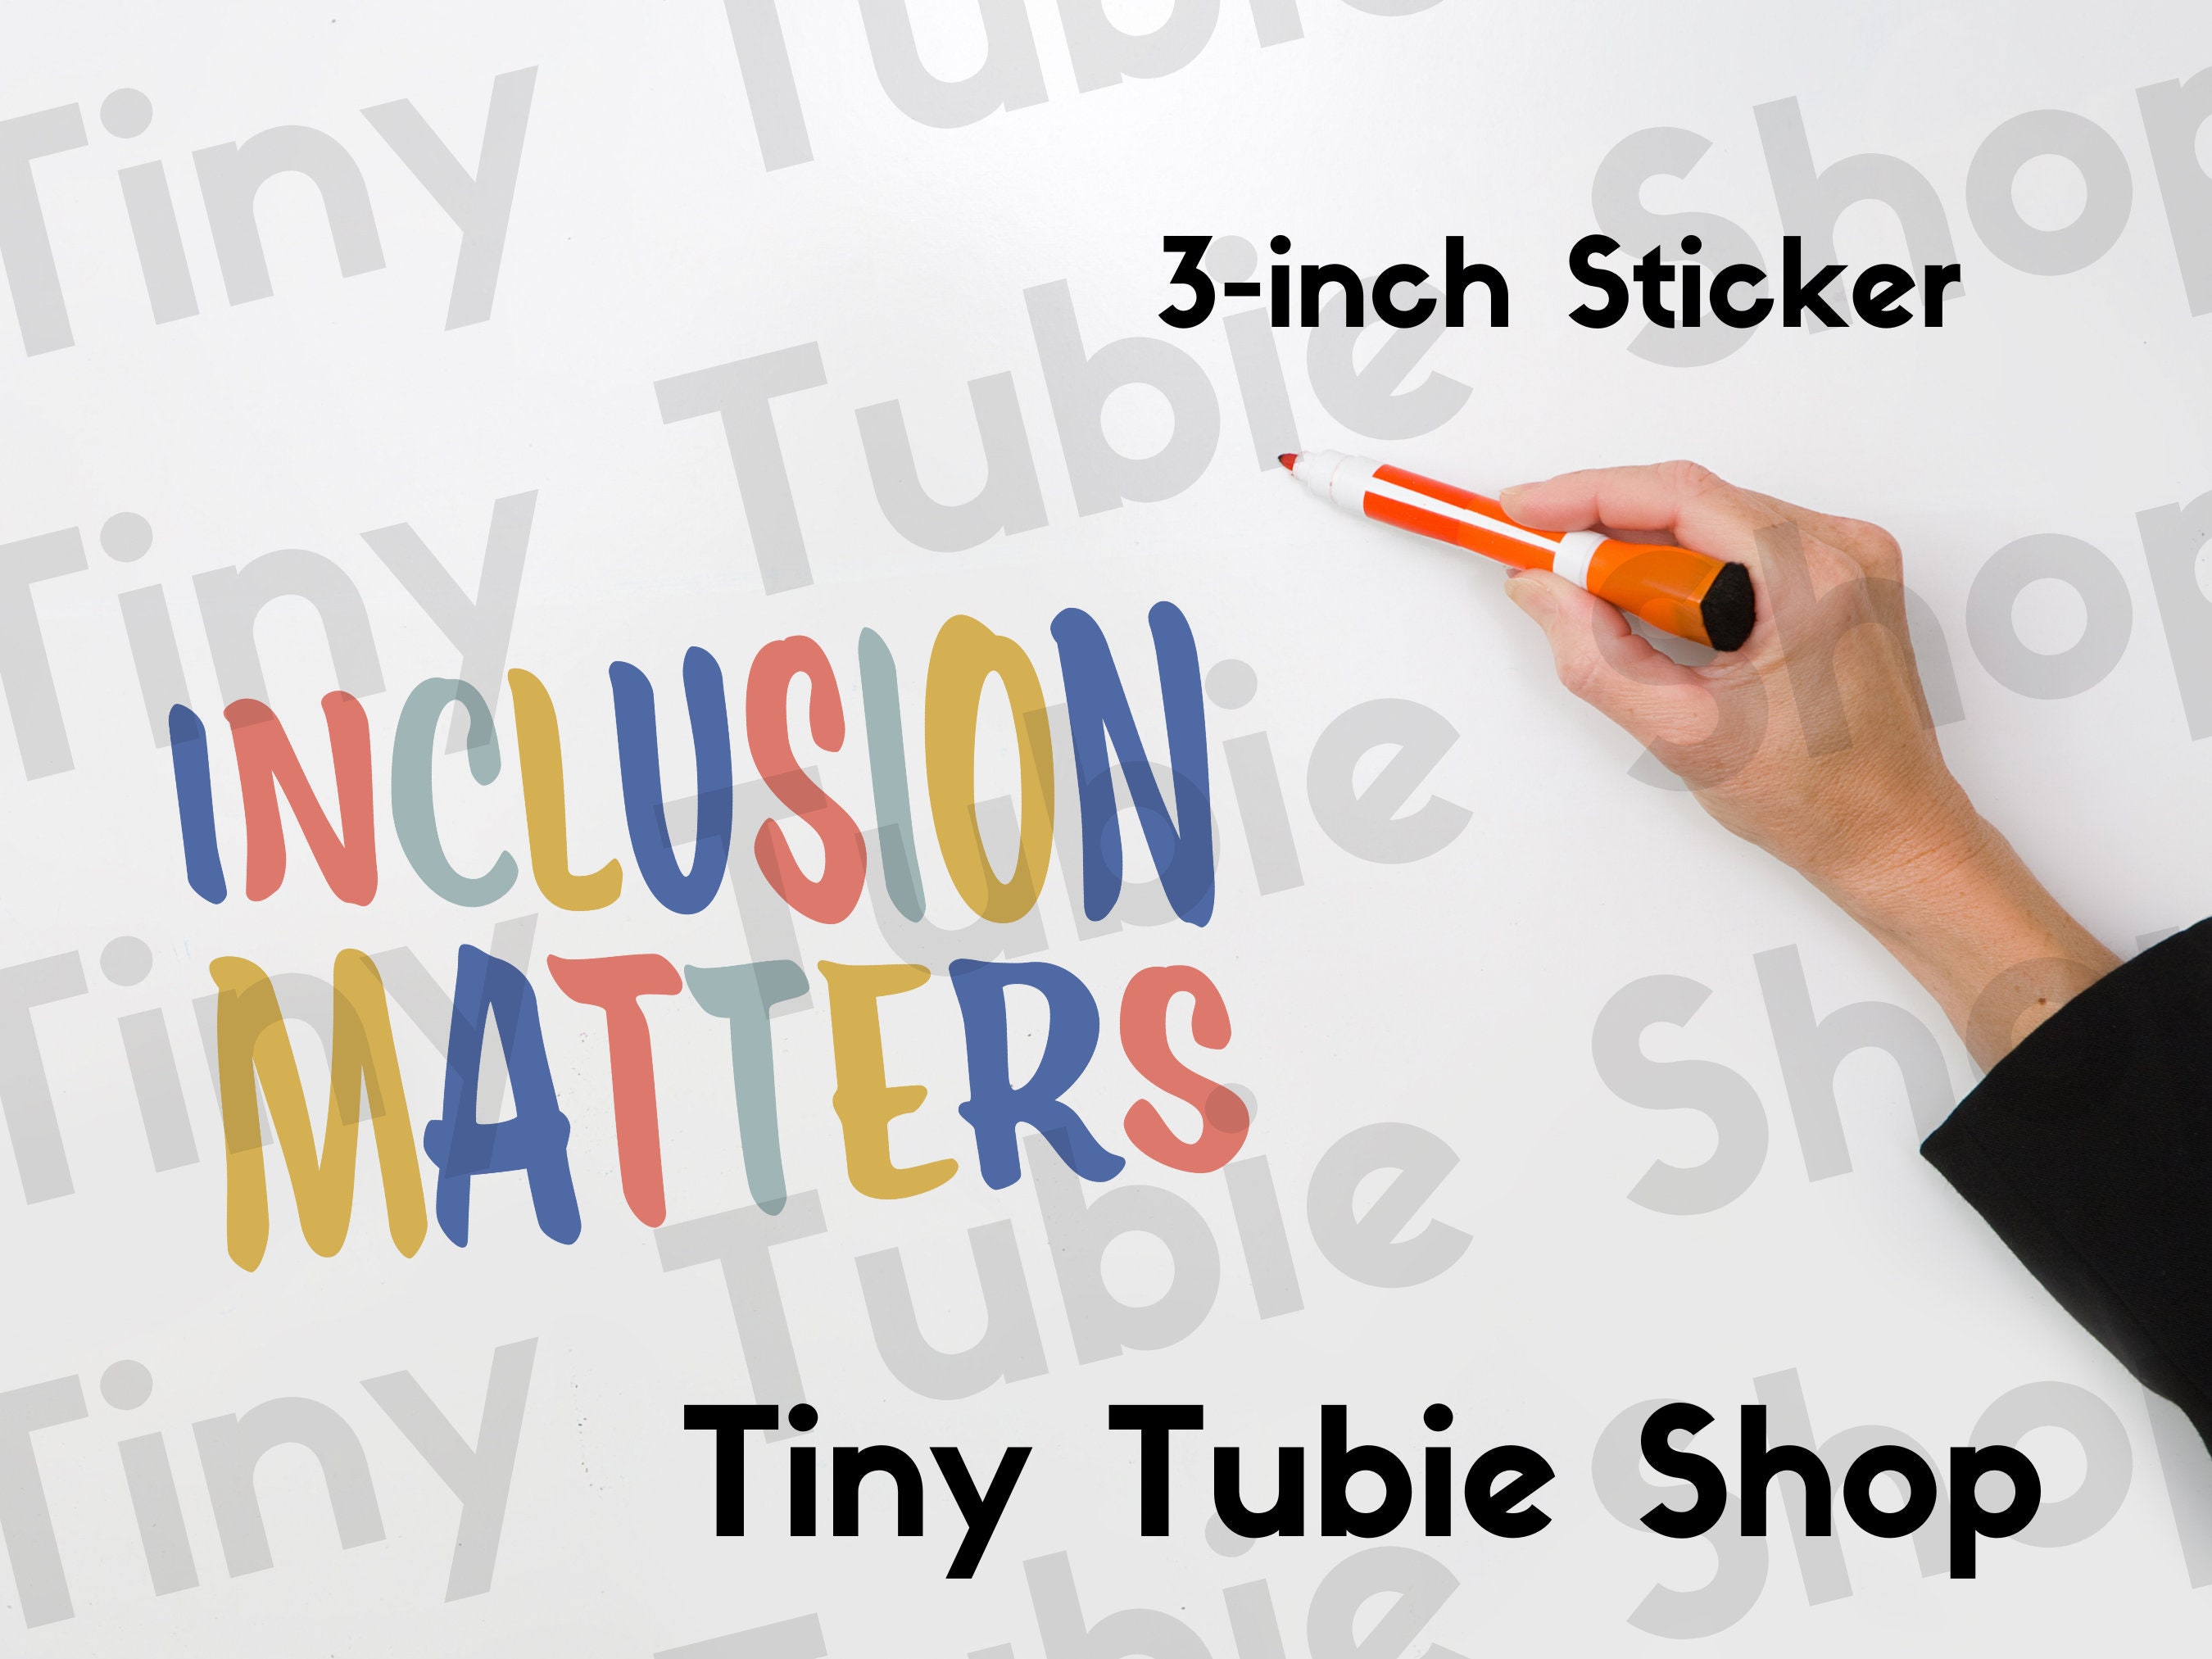 Sticker campaign lets Kutztown businesses show support for inclusion